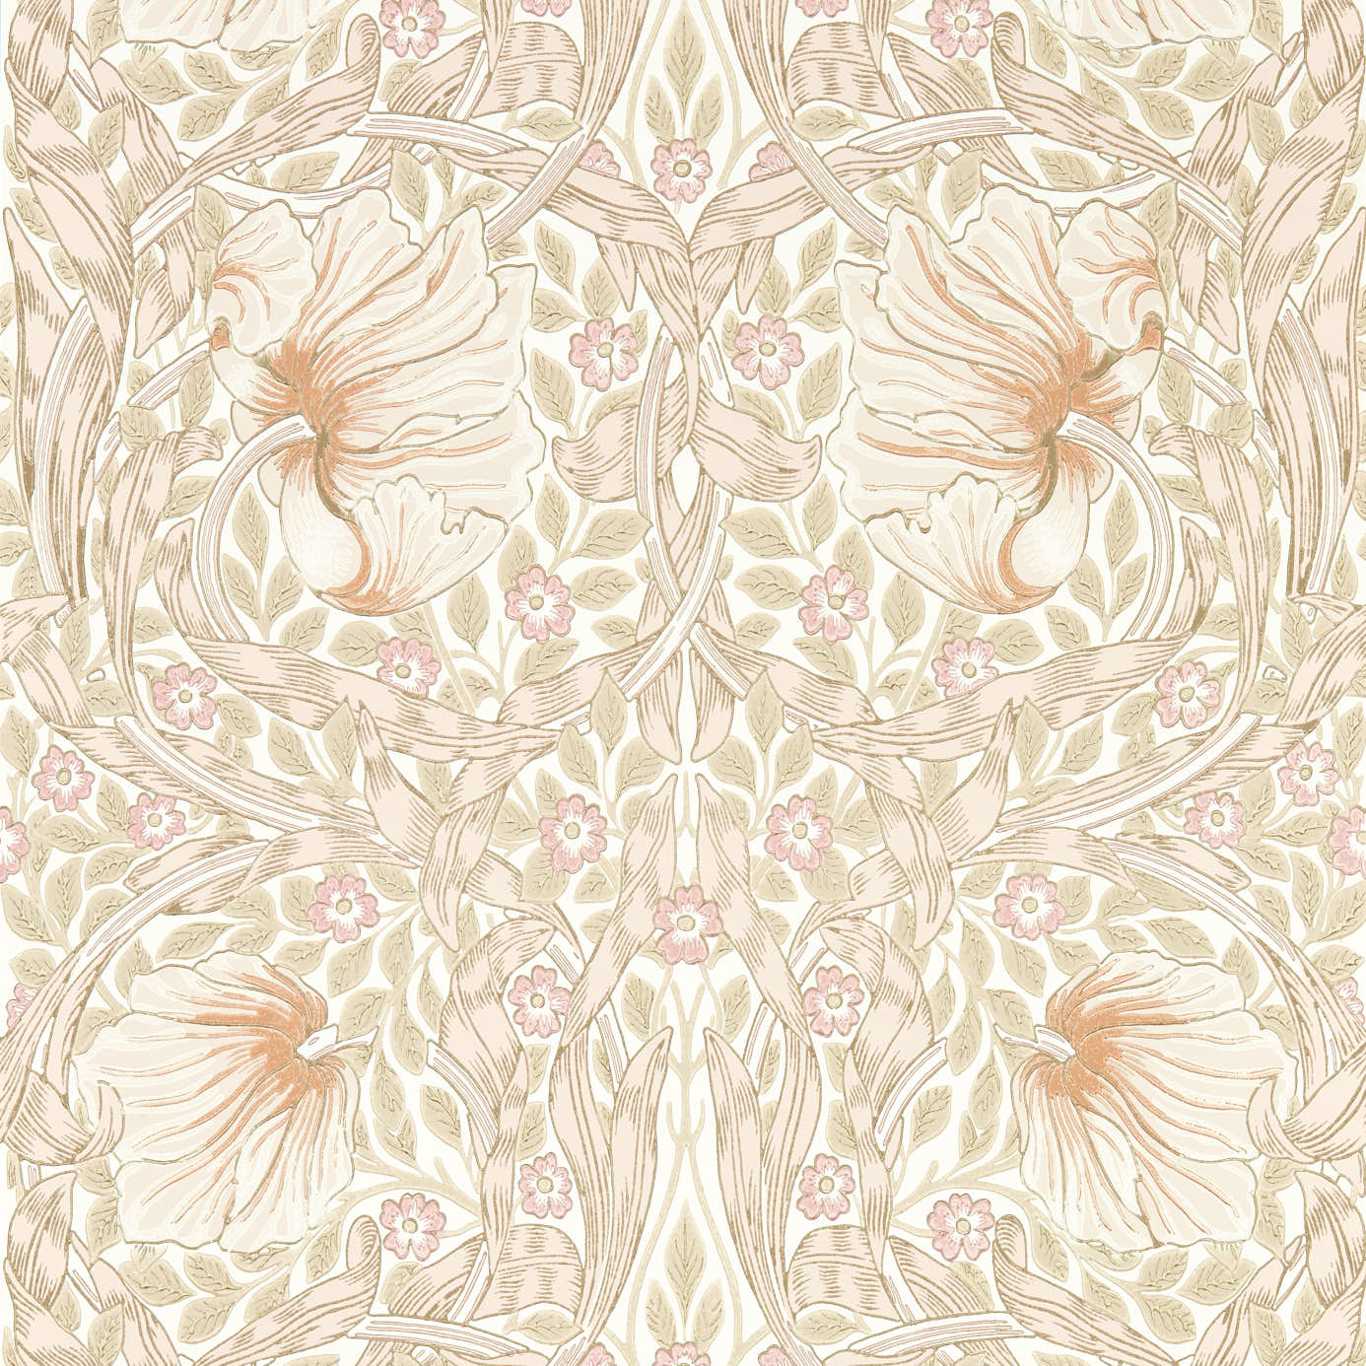 Morris & Co Pimpernel Cochineal Pink Floral Wallcovering